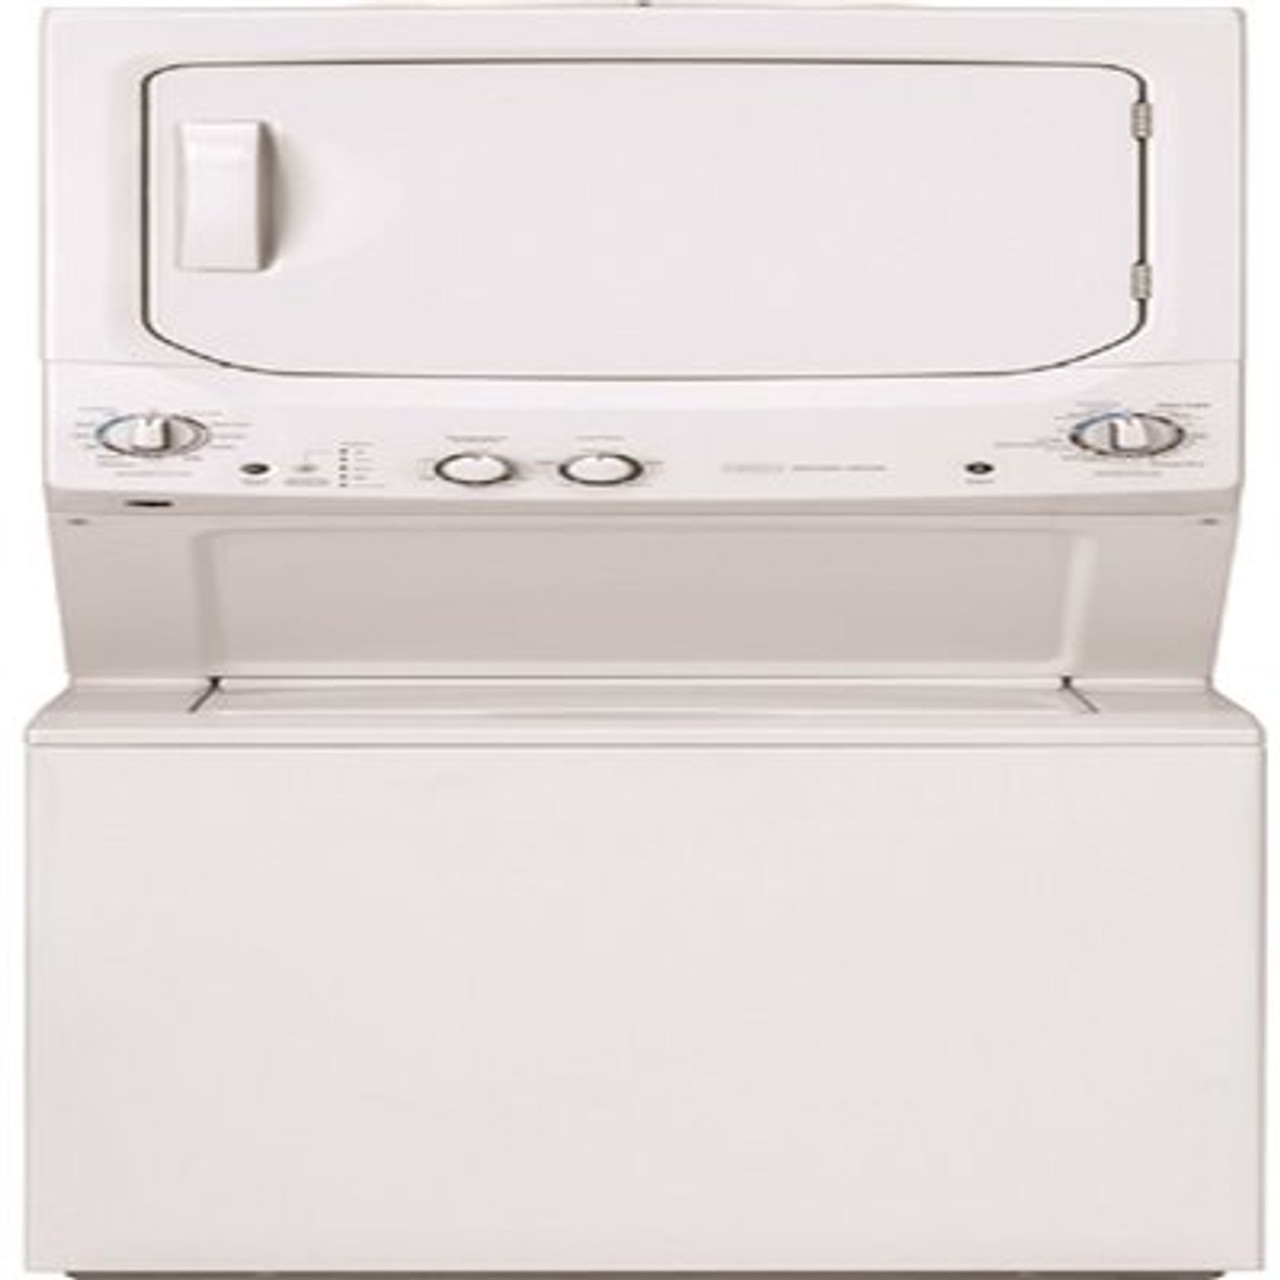 Crosley 3.8 cu. ft. Washer 5.9 cu. ft. Dryer 33.0 in. Smart Home All-in-One Washer and Dryer Combo in White